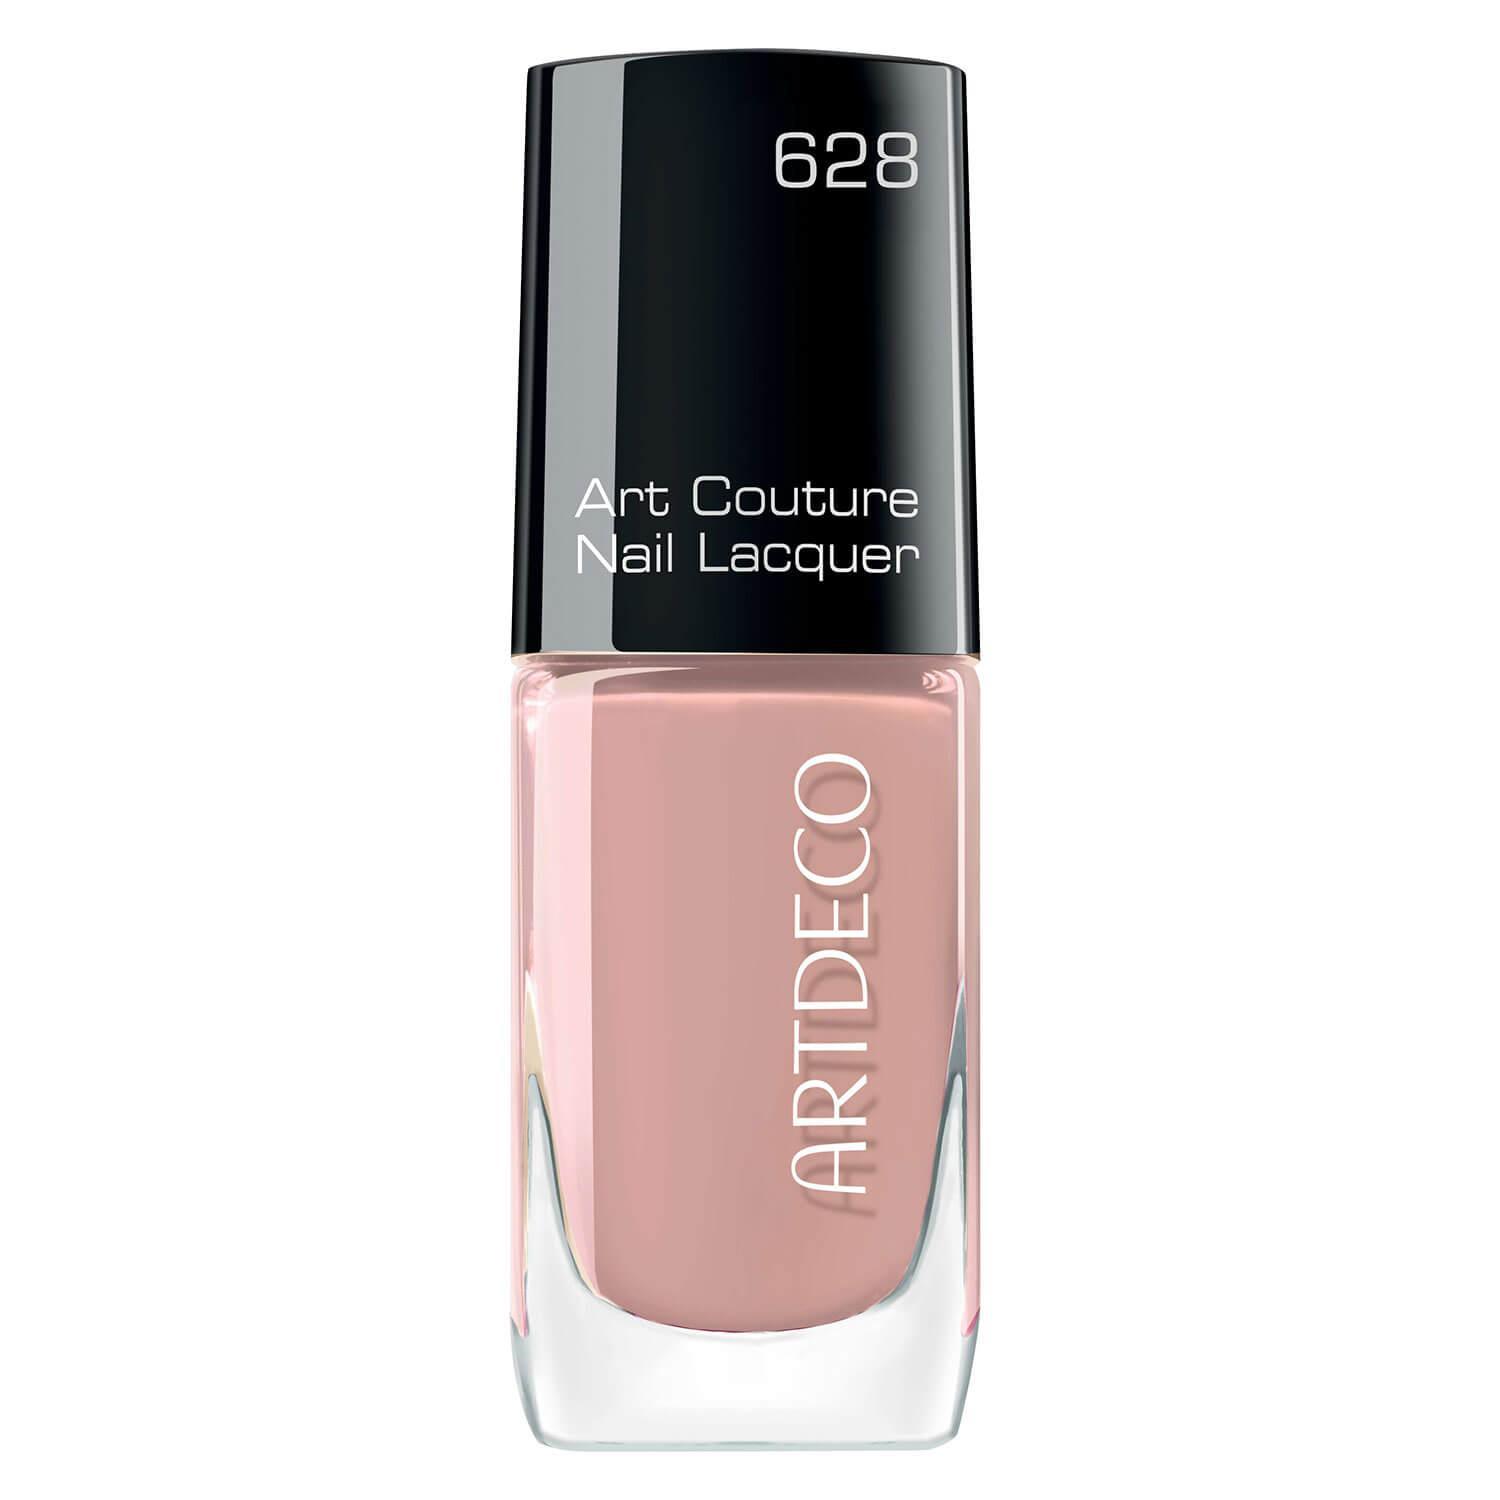 Art Couture - Nail Lacquer Touch of Rose 628